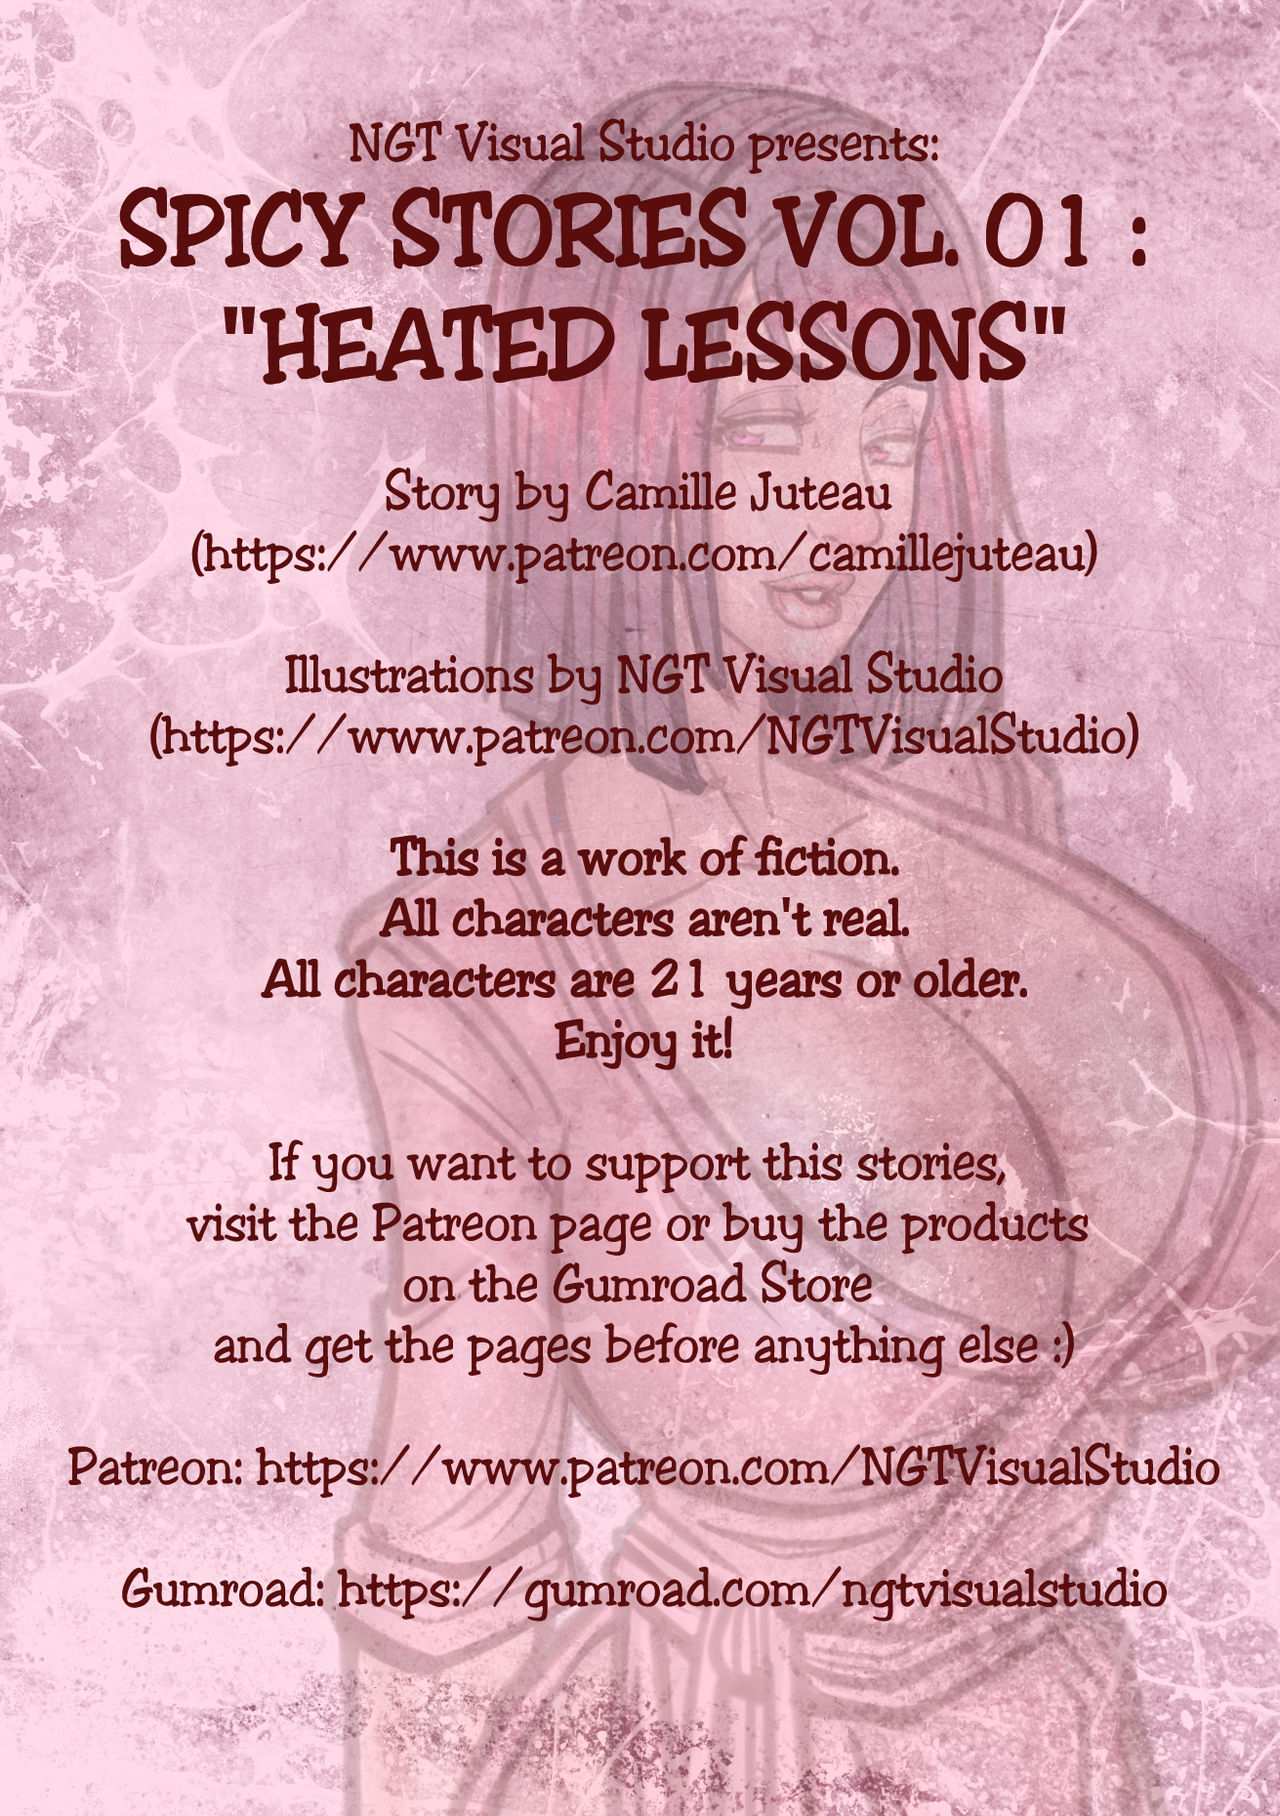 Spicy Stories Vol. 2 - Heated Lessons - NGT)Spicy Stories Vol. 2 - Heated L...